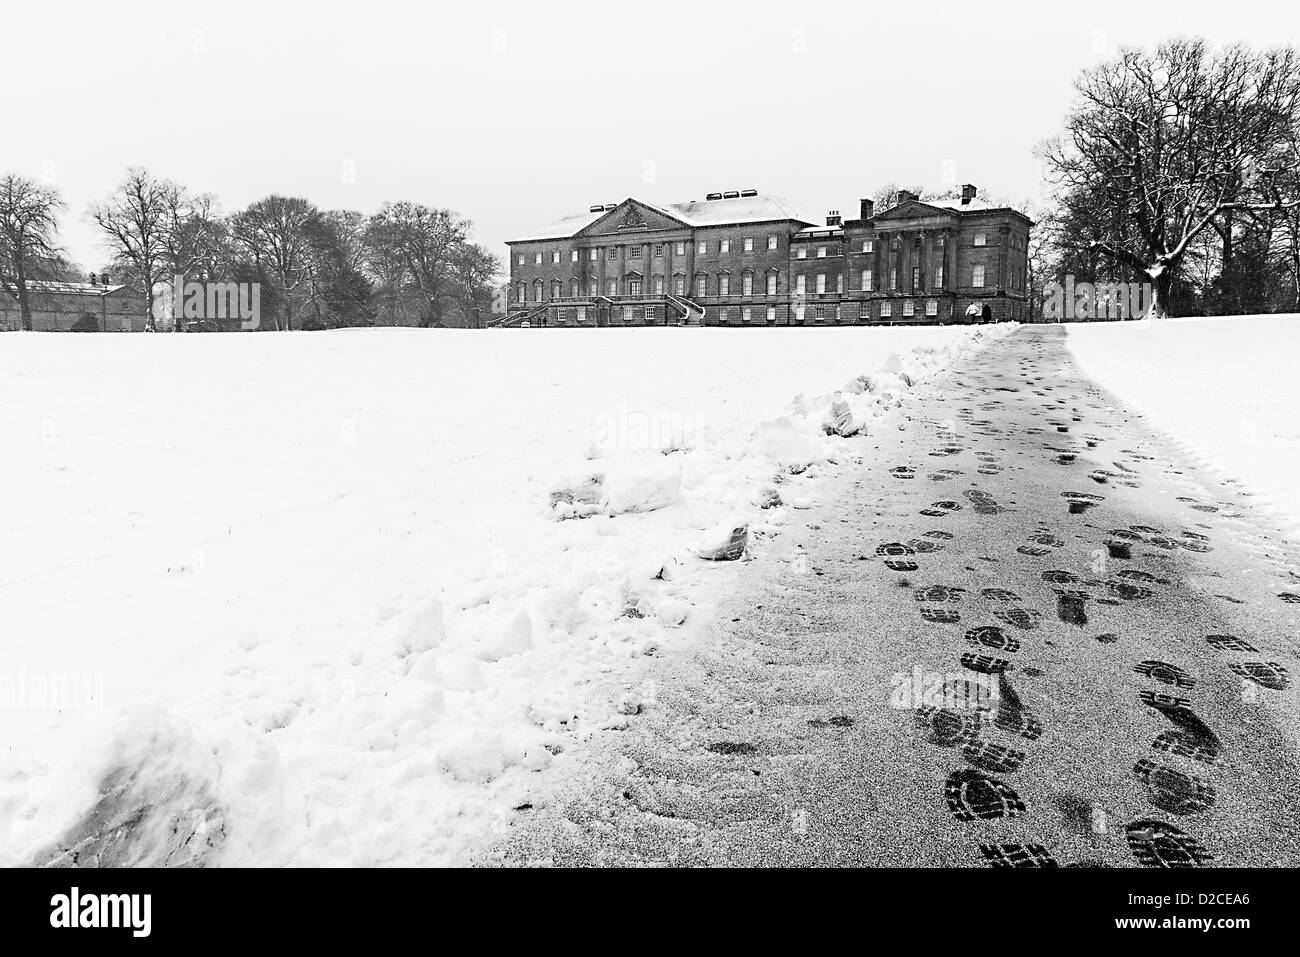 Nostell Priory, Crofton, UK. Saturday 19th January 2013. Snow covers Nostell Priory. Alamy Live News. Stock Photo